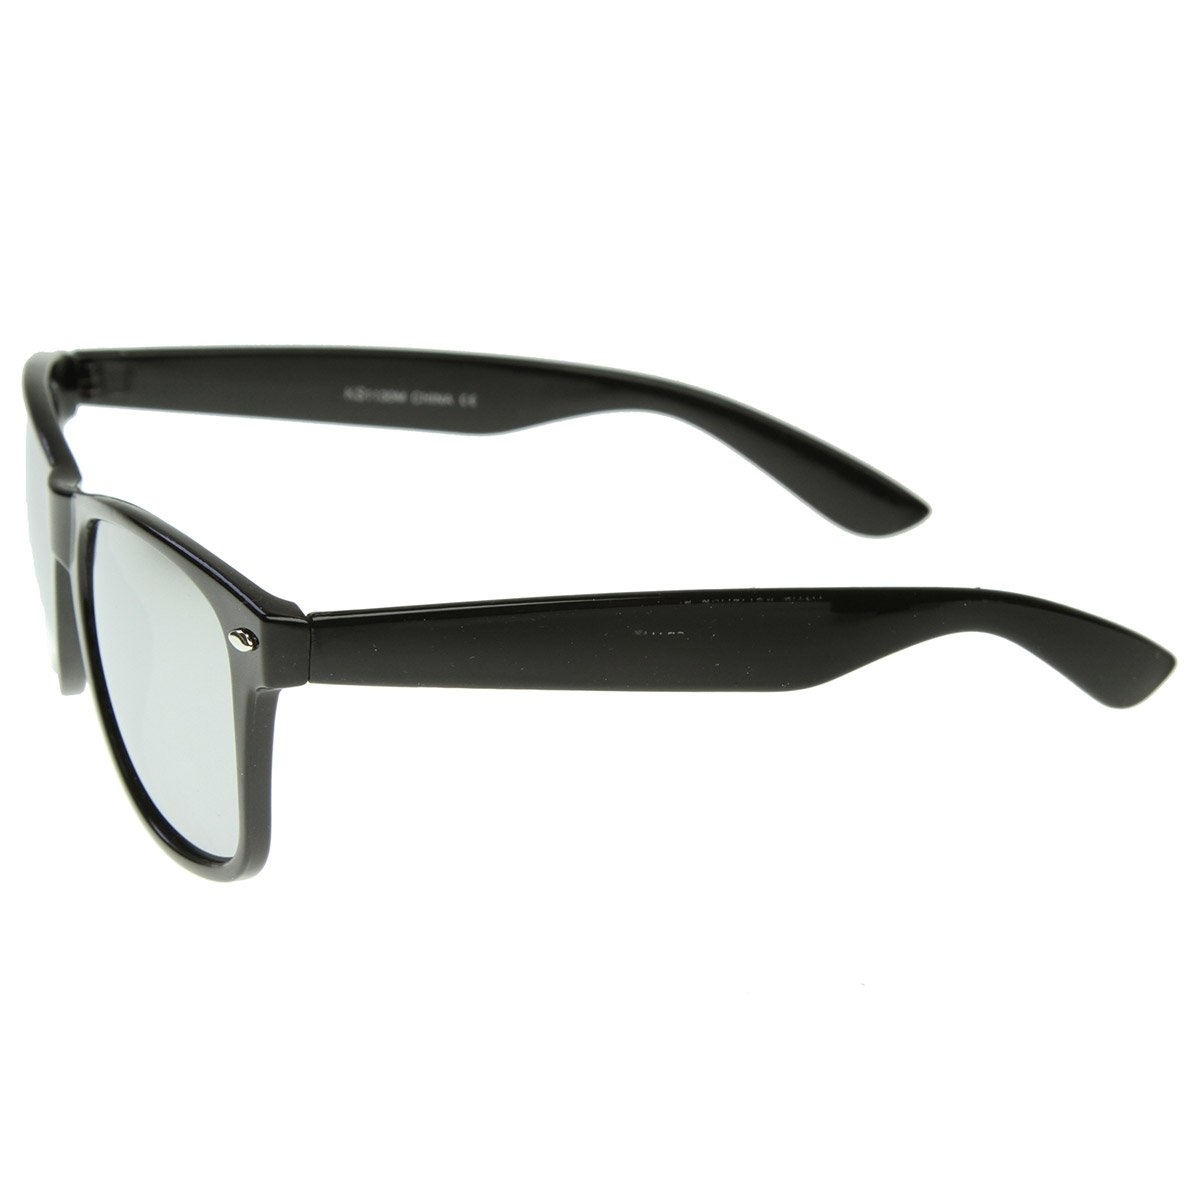 Classic Retro Fashion Horn Rimmed Style Sunglasses W/ Fully Mirrored Lens - Black